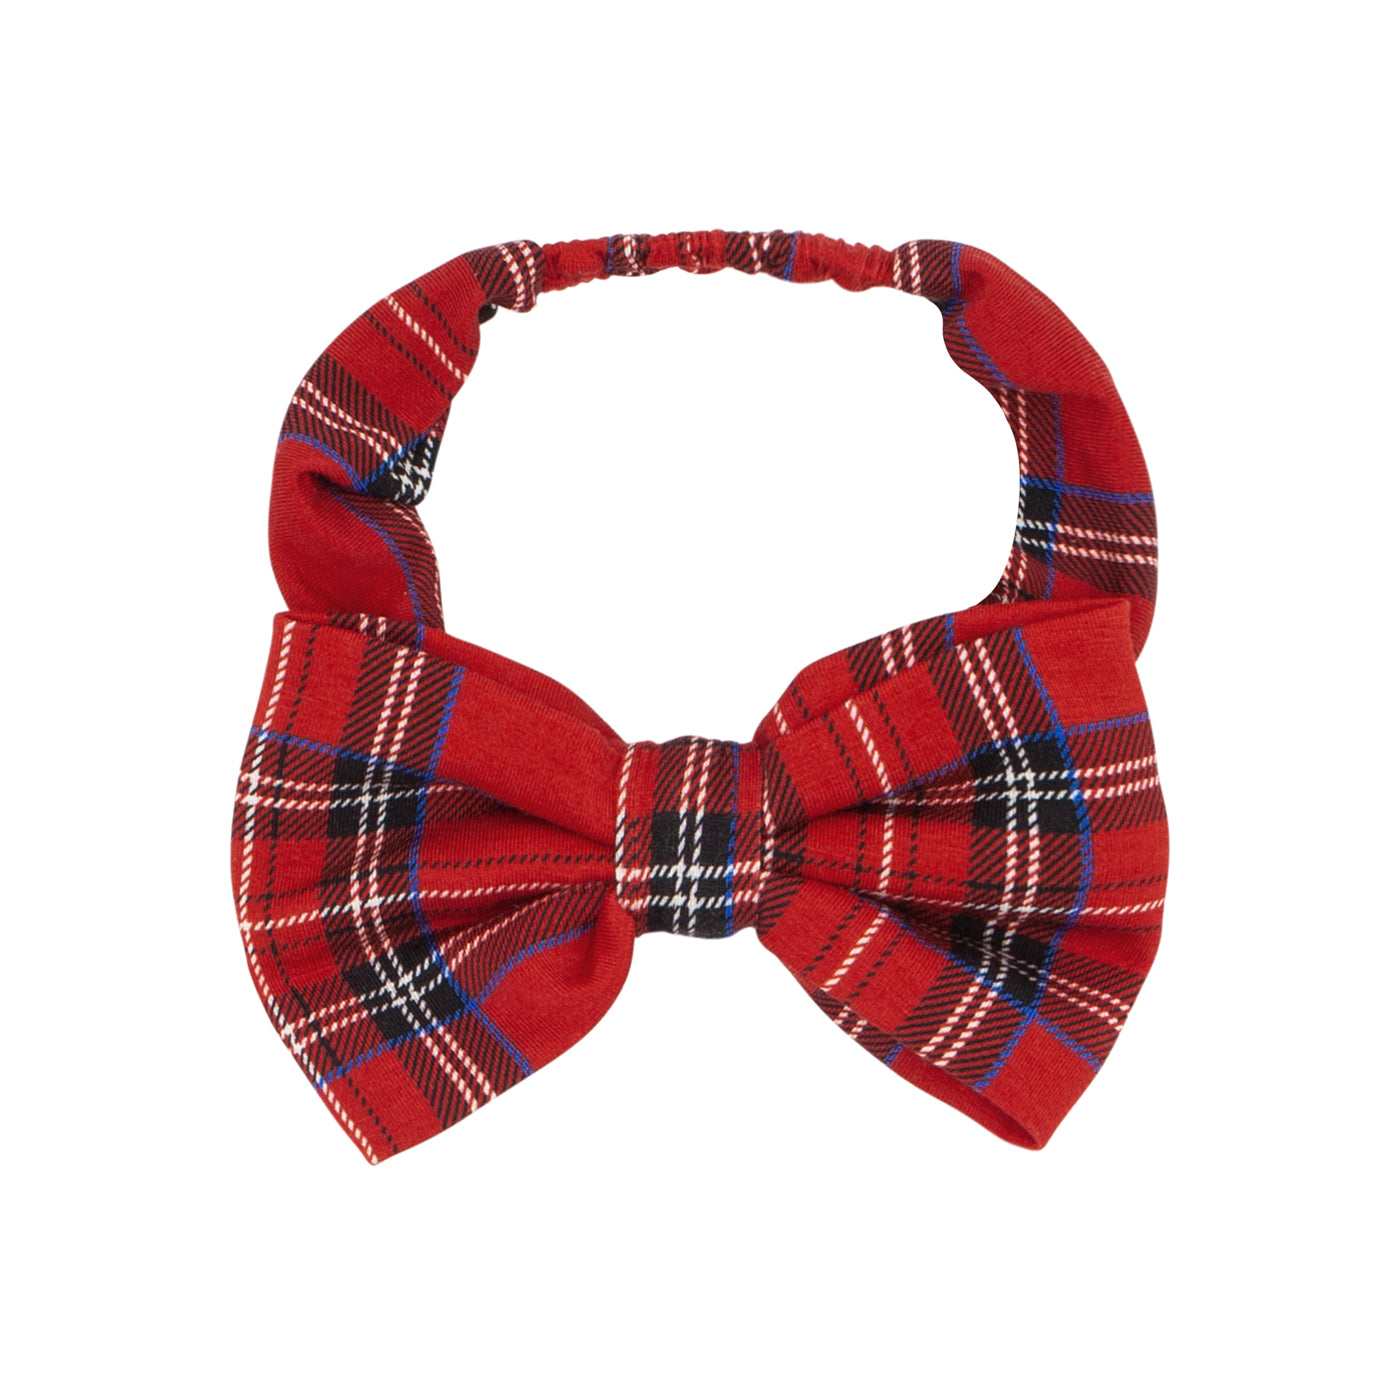 Alternate flat lay image of a Holiday Plaid luxe bow headband